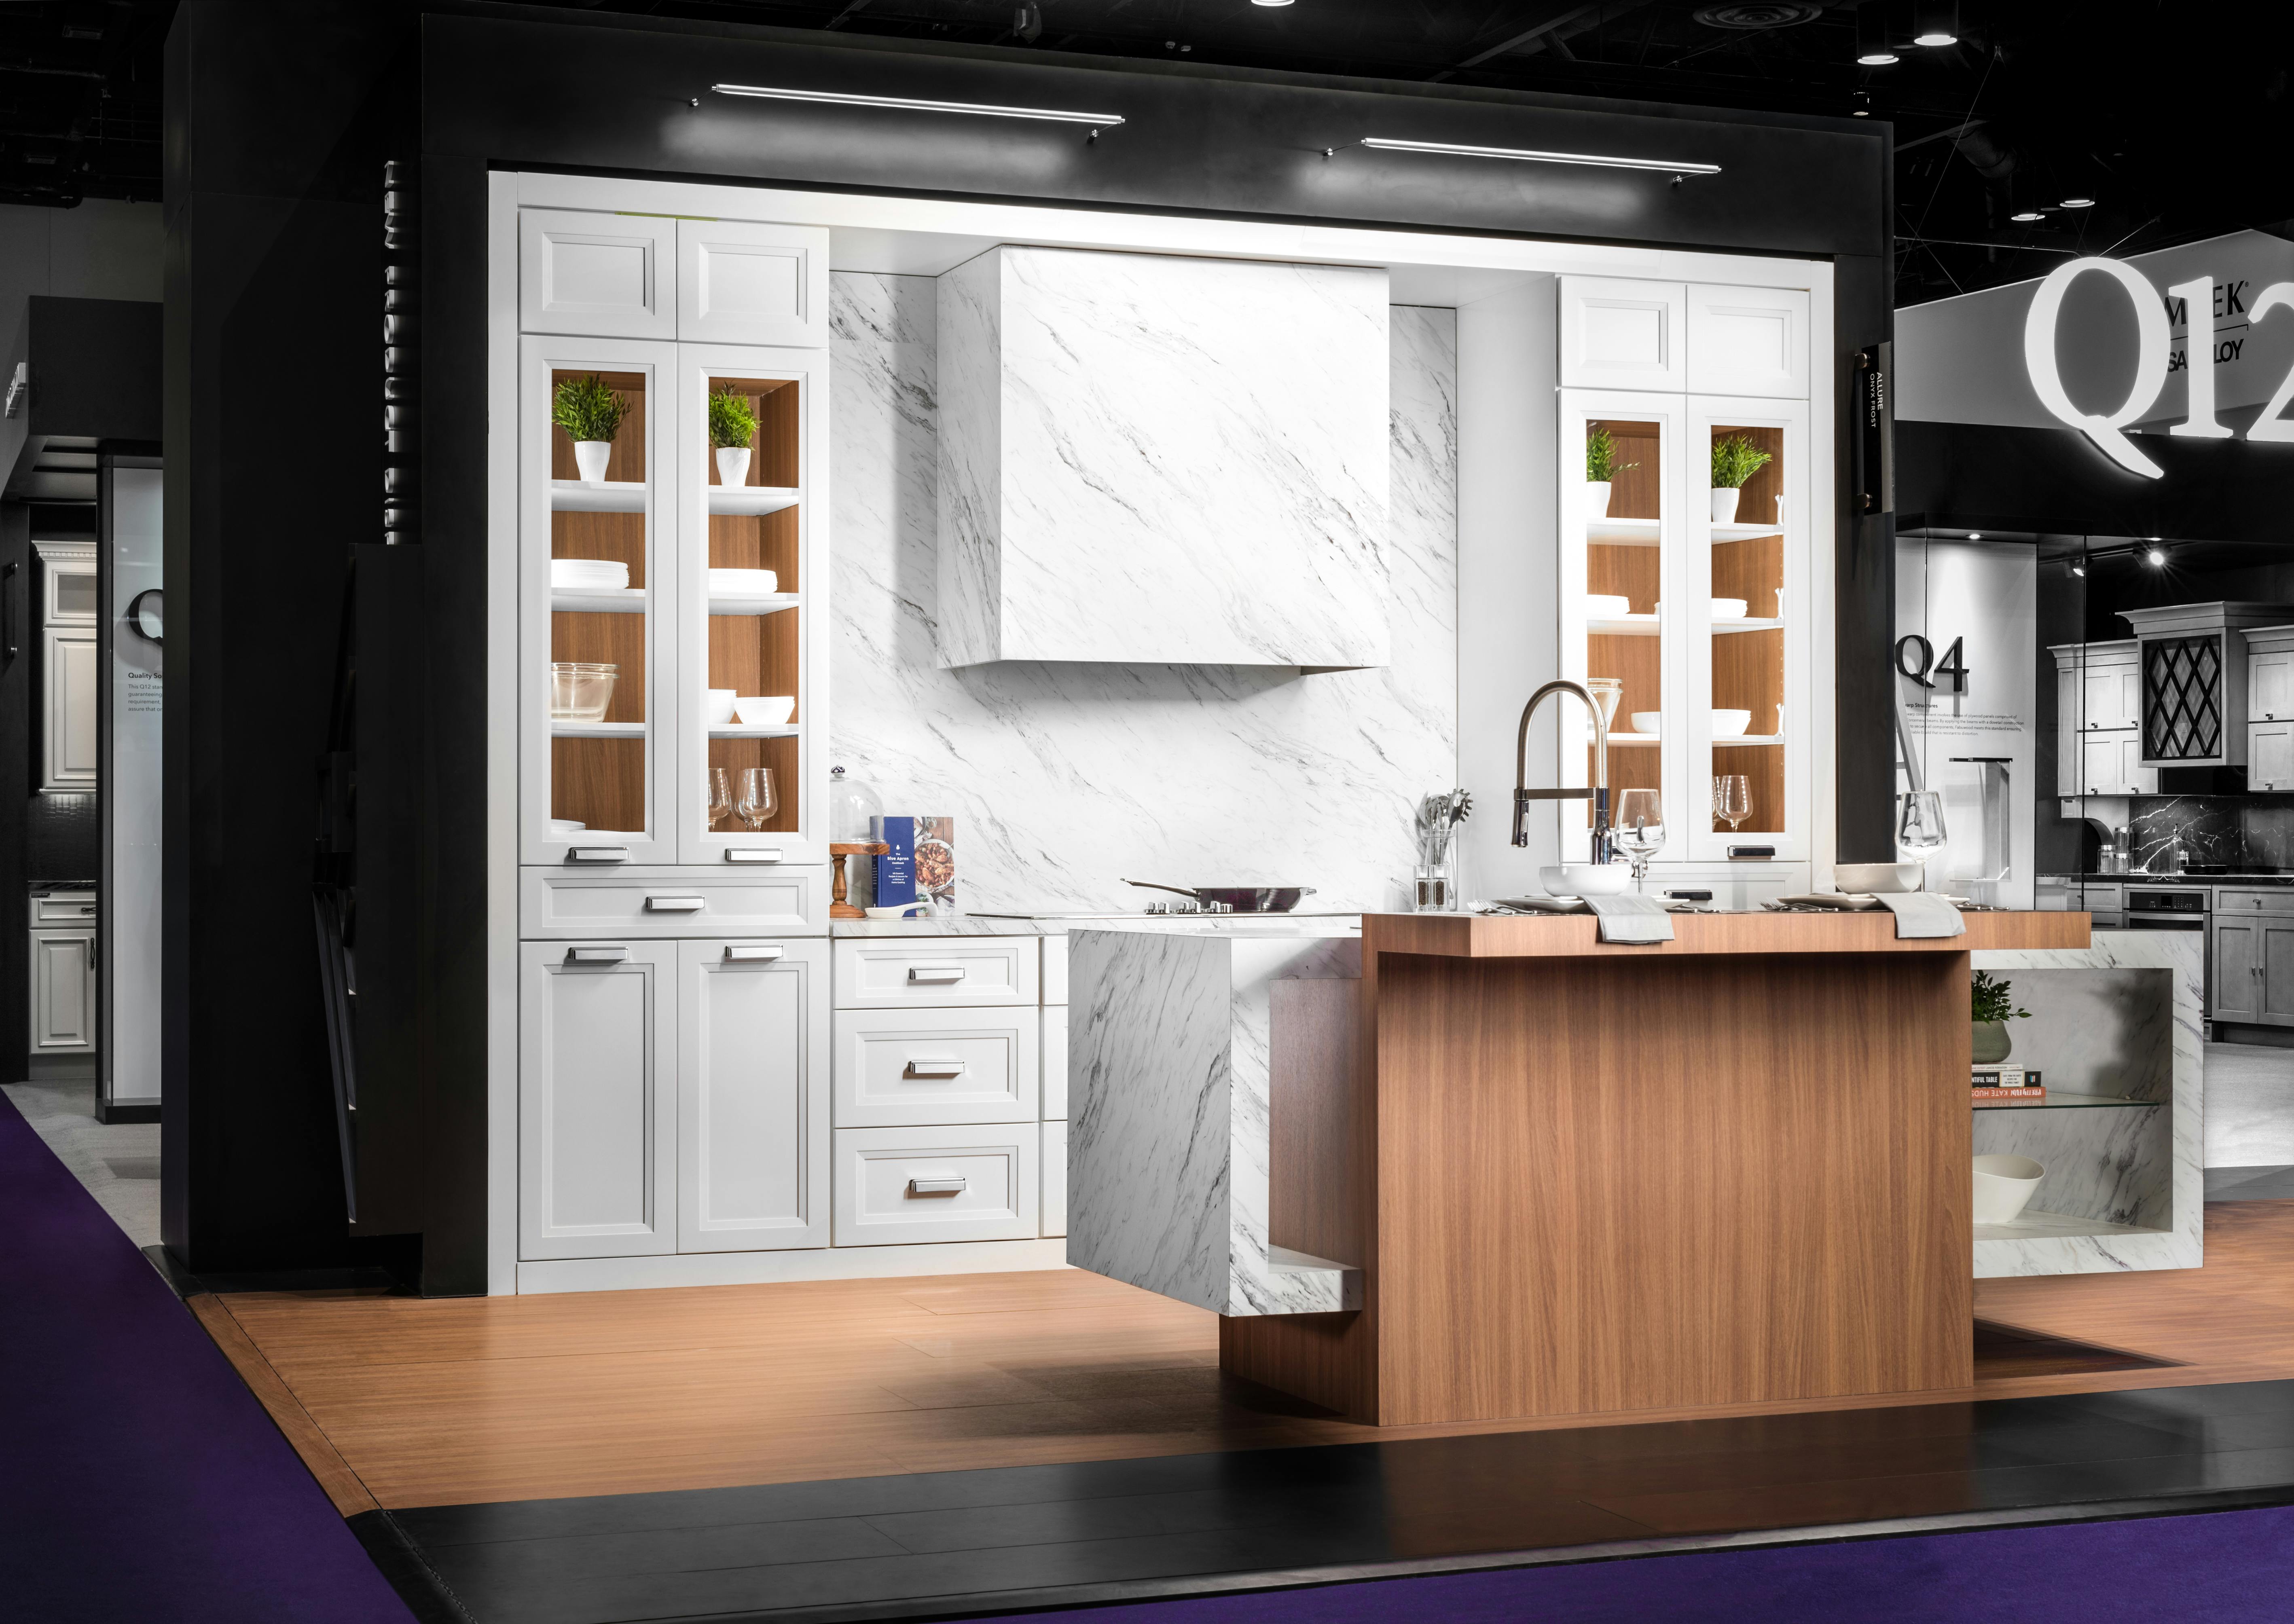 Kbis 2018 Fabuwood Cabinetry